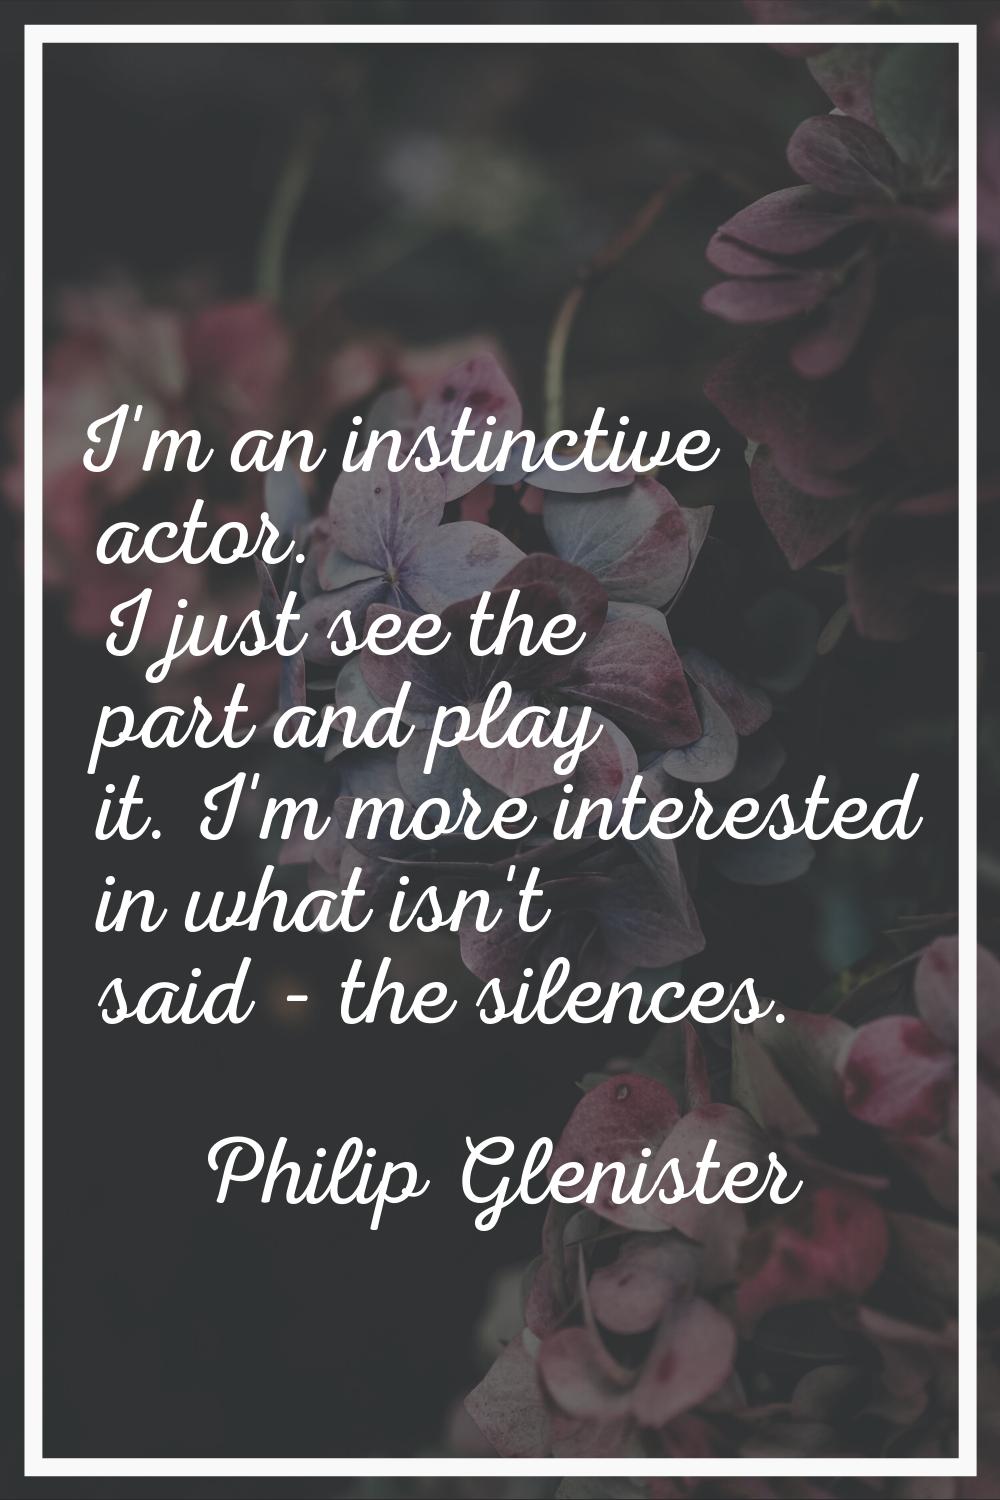 I'm an instinctive actor. I just see the part and play it. I'm more interested in what isn't said -